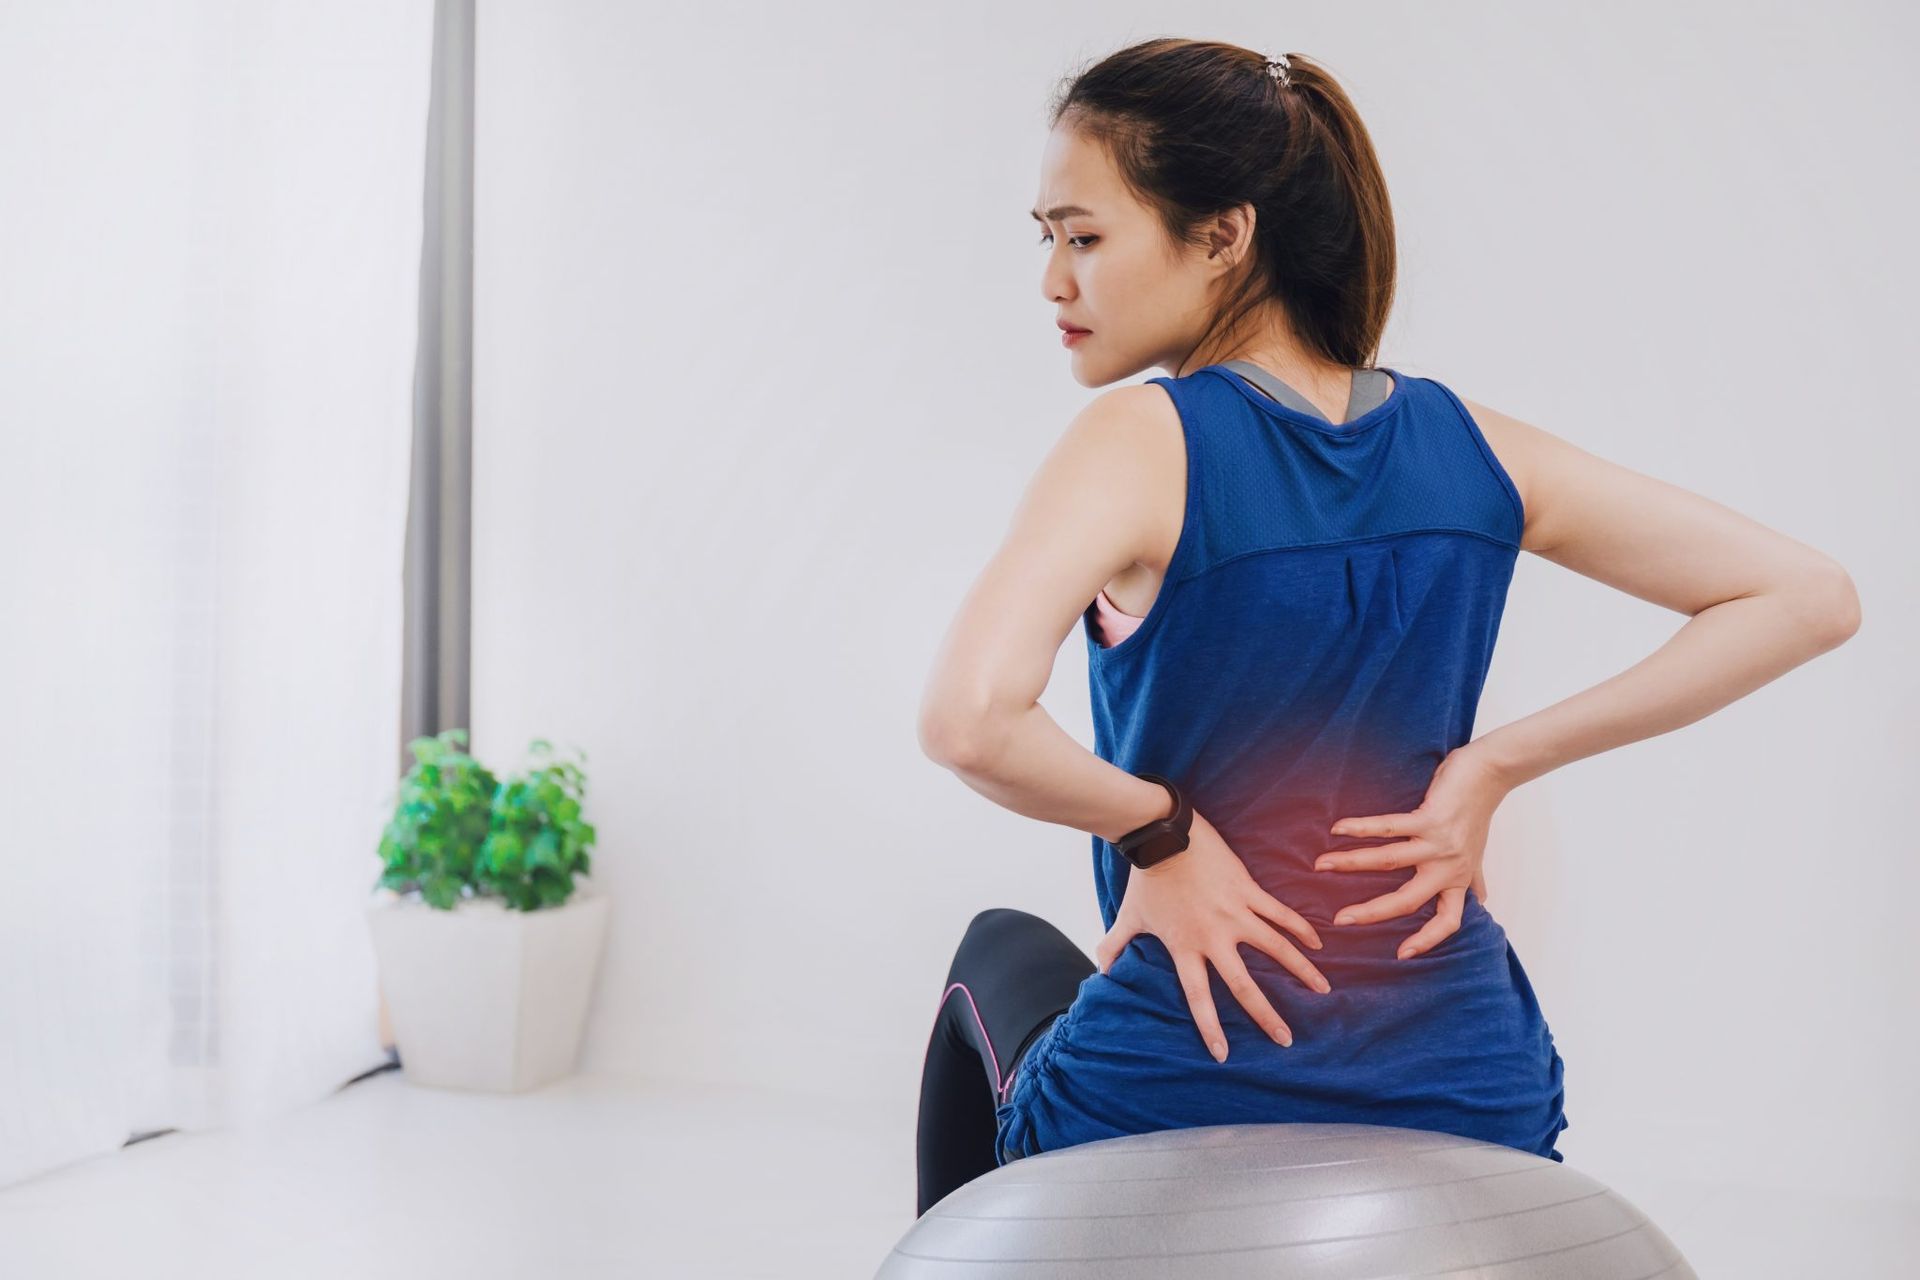 7 Ways to Relieve Back Pain Naturally